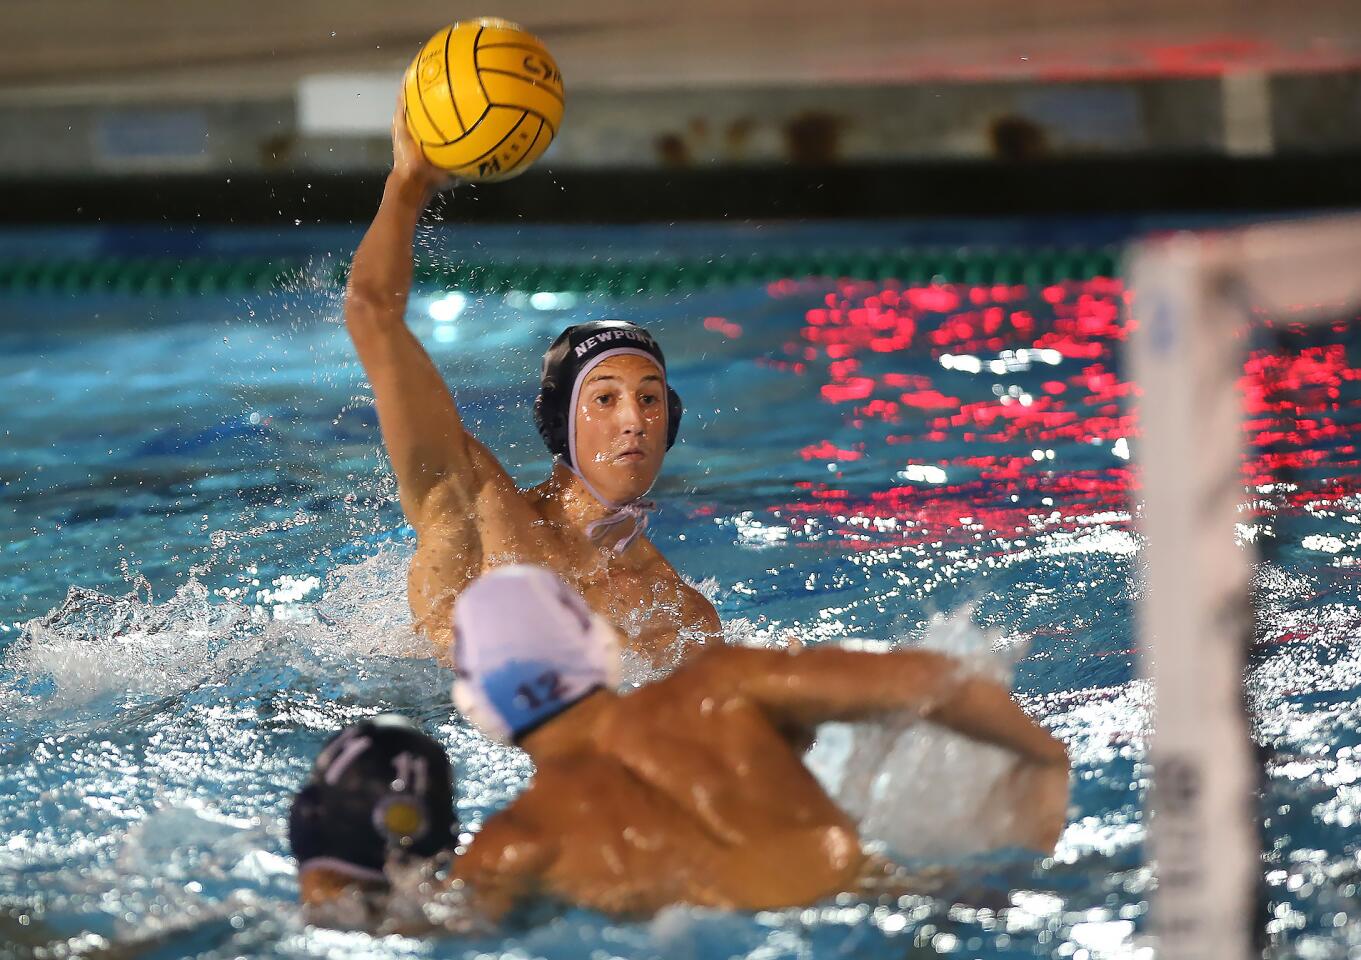 Newport Harbor High's Jack White prepares to fire the ball for a goal during Surf League water polo match against Laguna Beach, at Corona del Mar High on Wednesday.